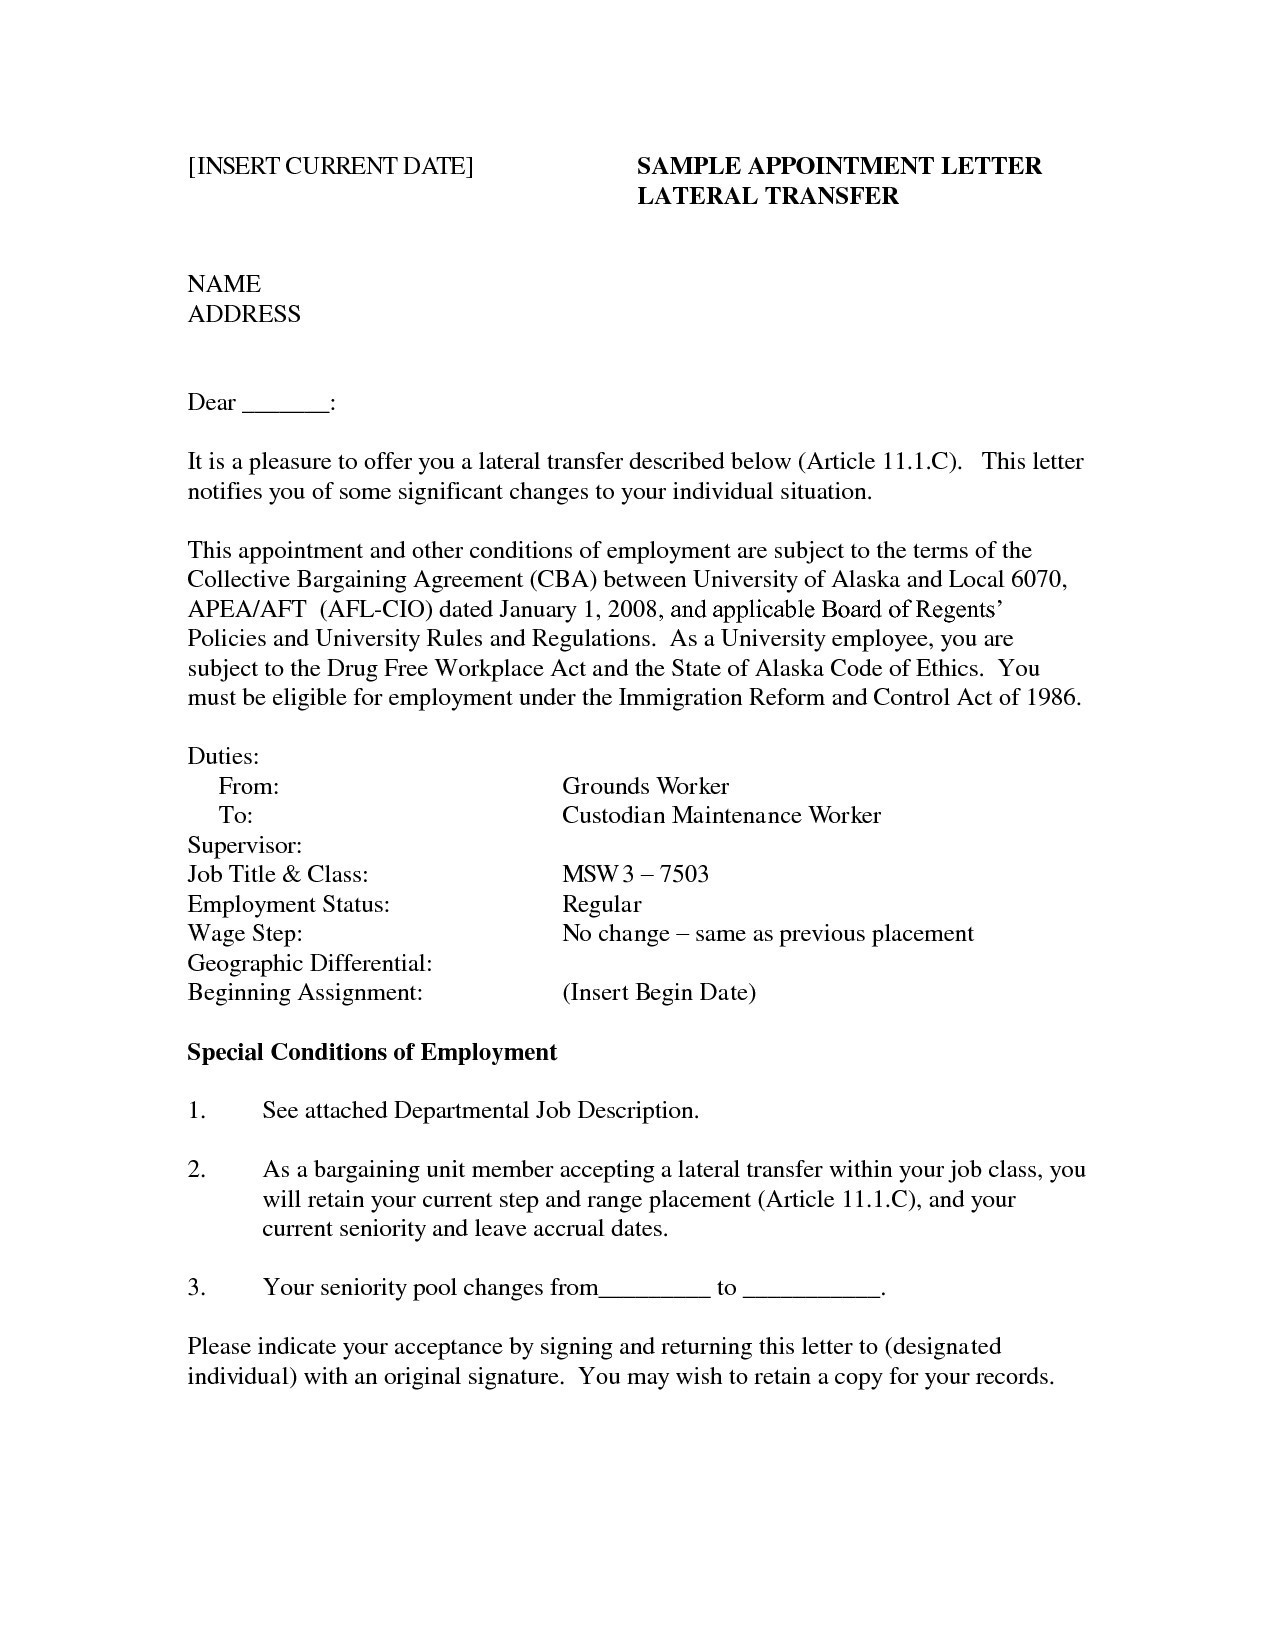 Cover Letter format Template - Job Application Letter format Template Copy Cover Letter Template Hr